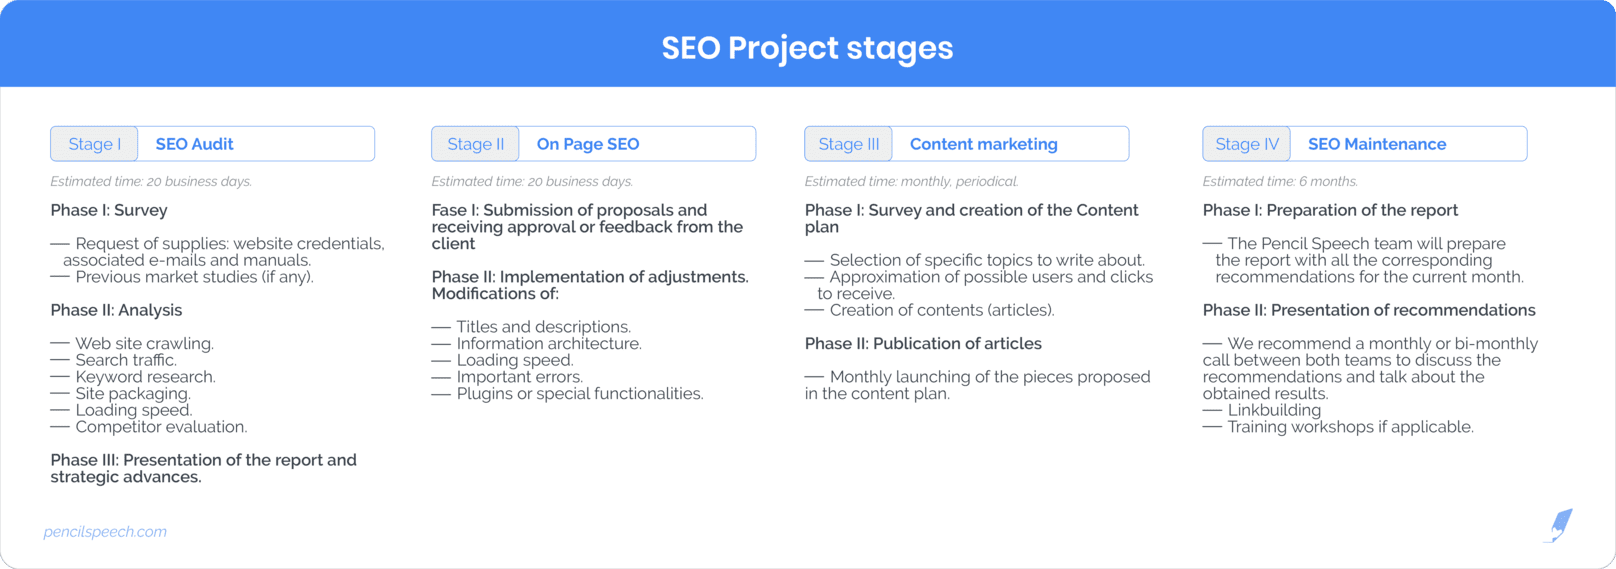 Infographic-SEO-project-stages